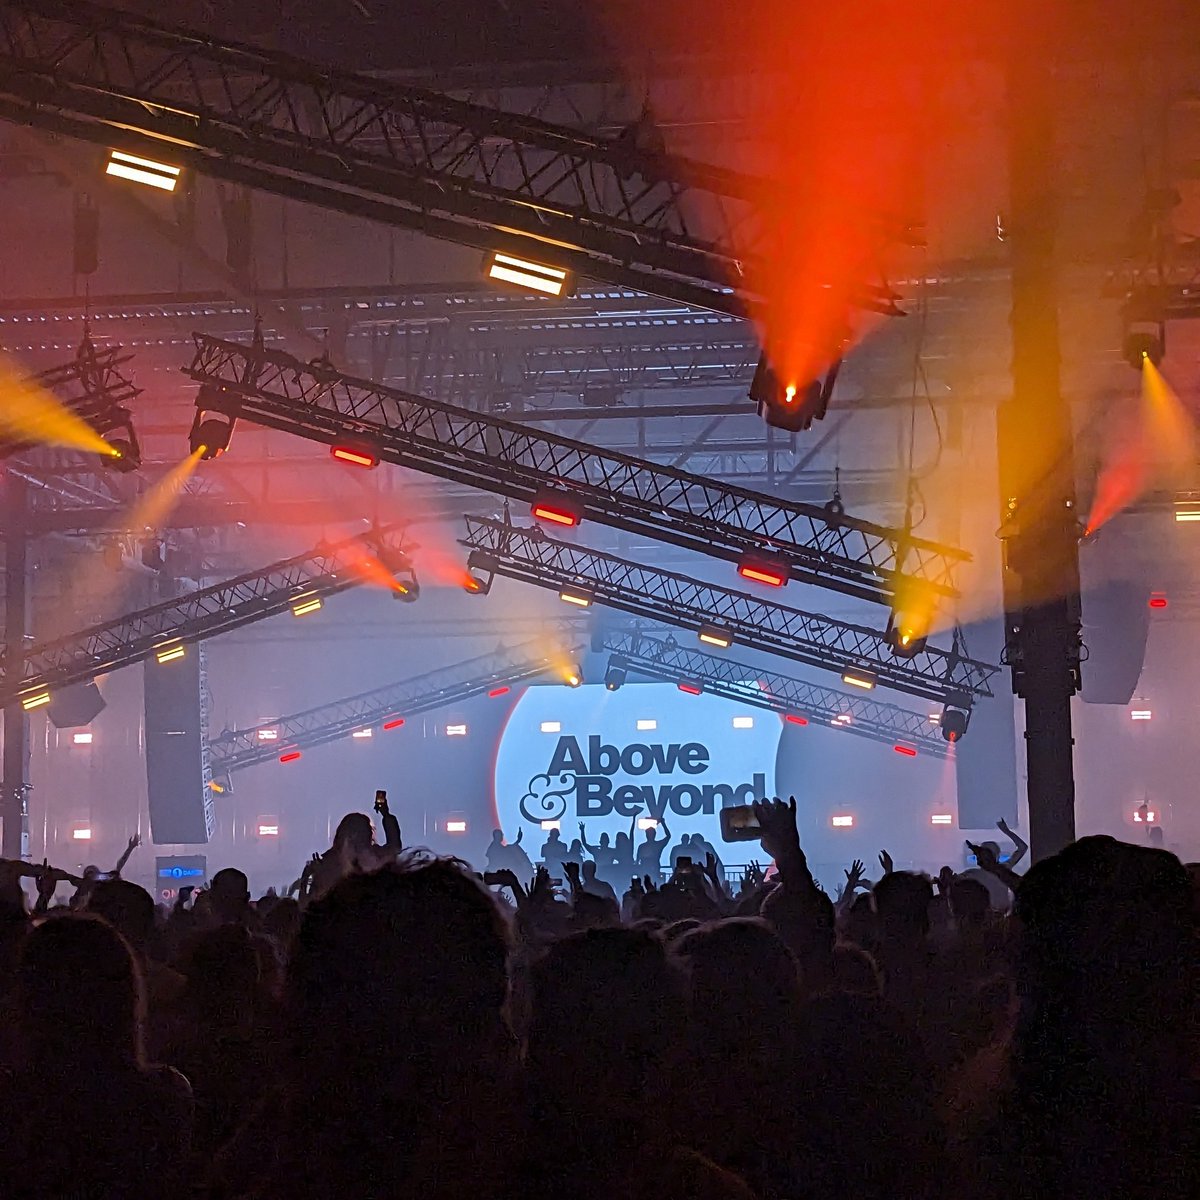 If you don't play you'll never win ☀️ 🌙 @aboveandbeyond ❤️ LOVE what @drumsheds have done with the old IKEA, venue is insane 🔥